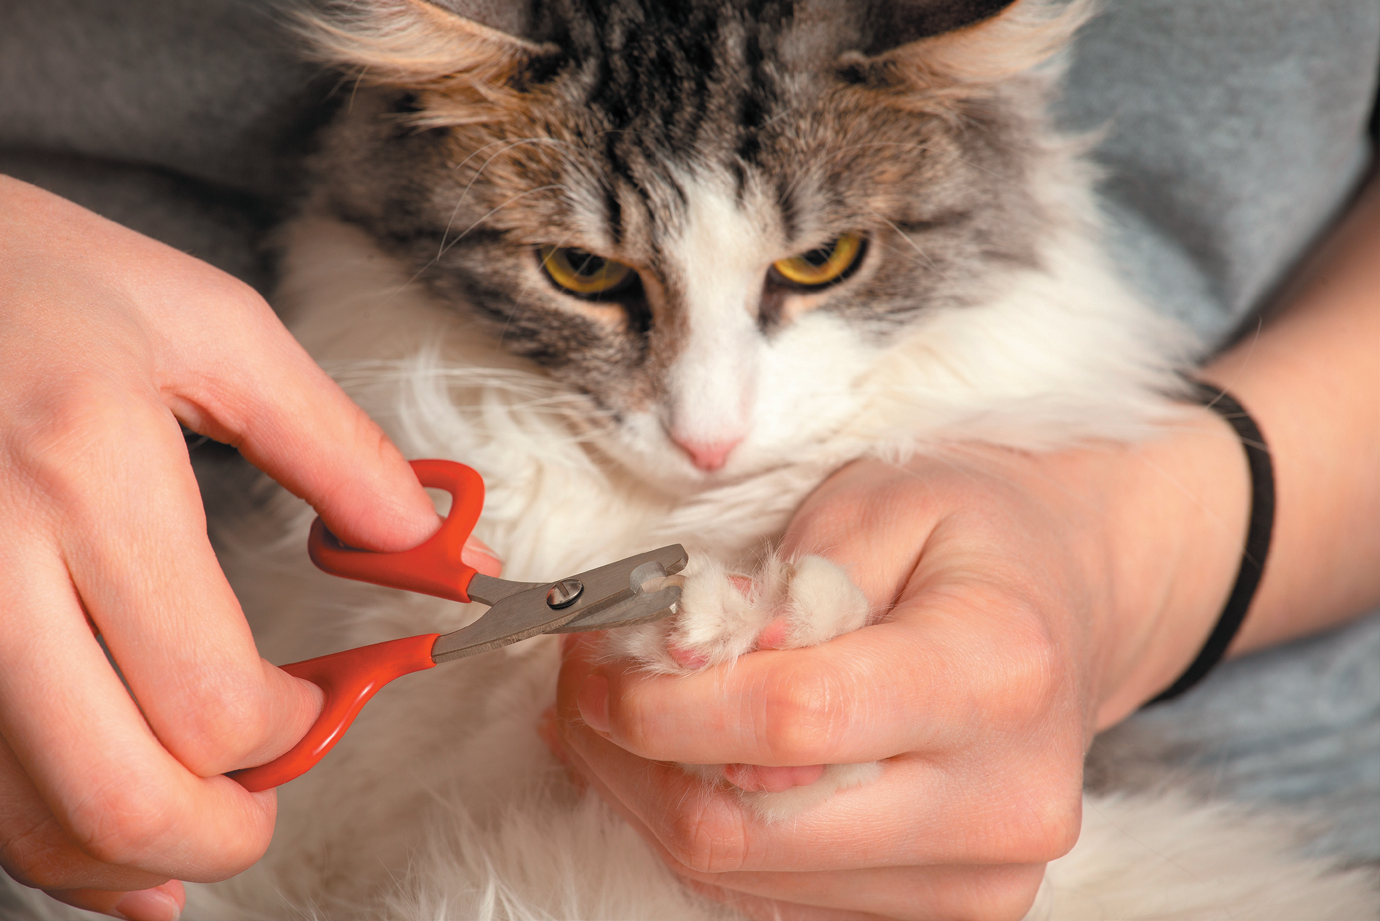 Nail Trimming Made Easier - Tufts Catnip